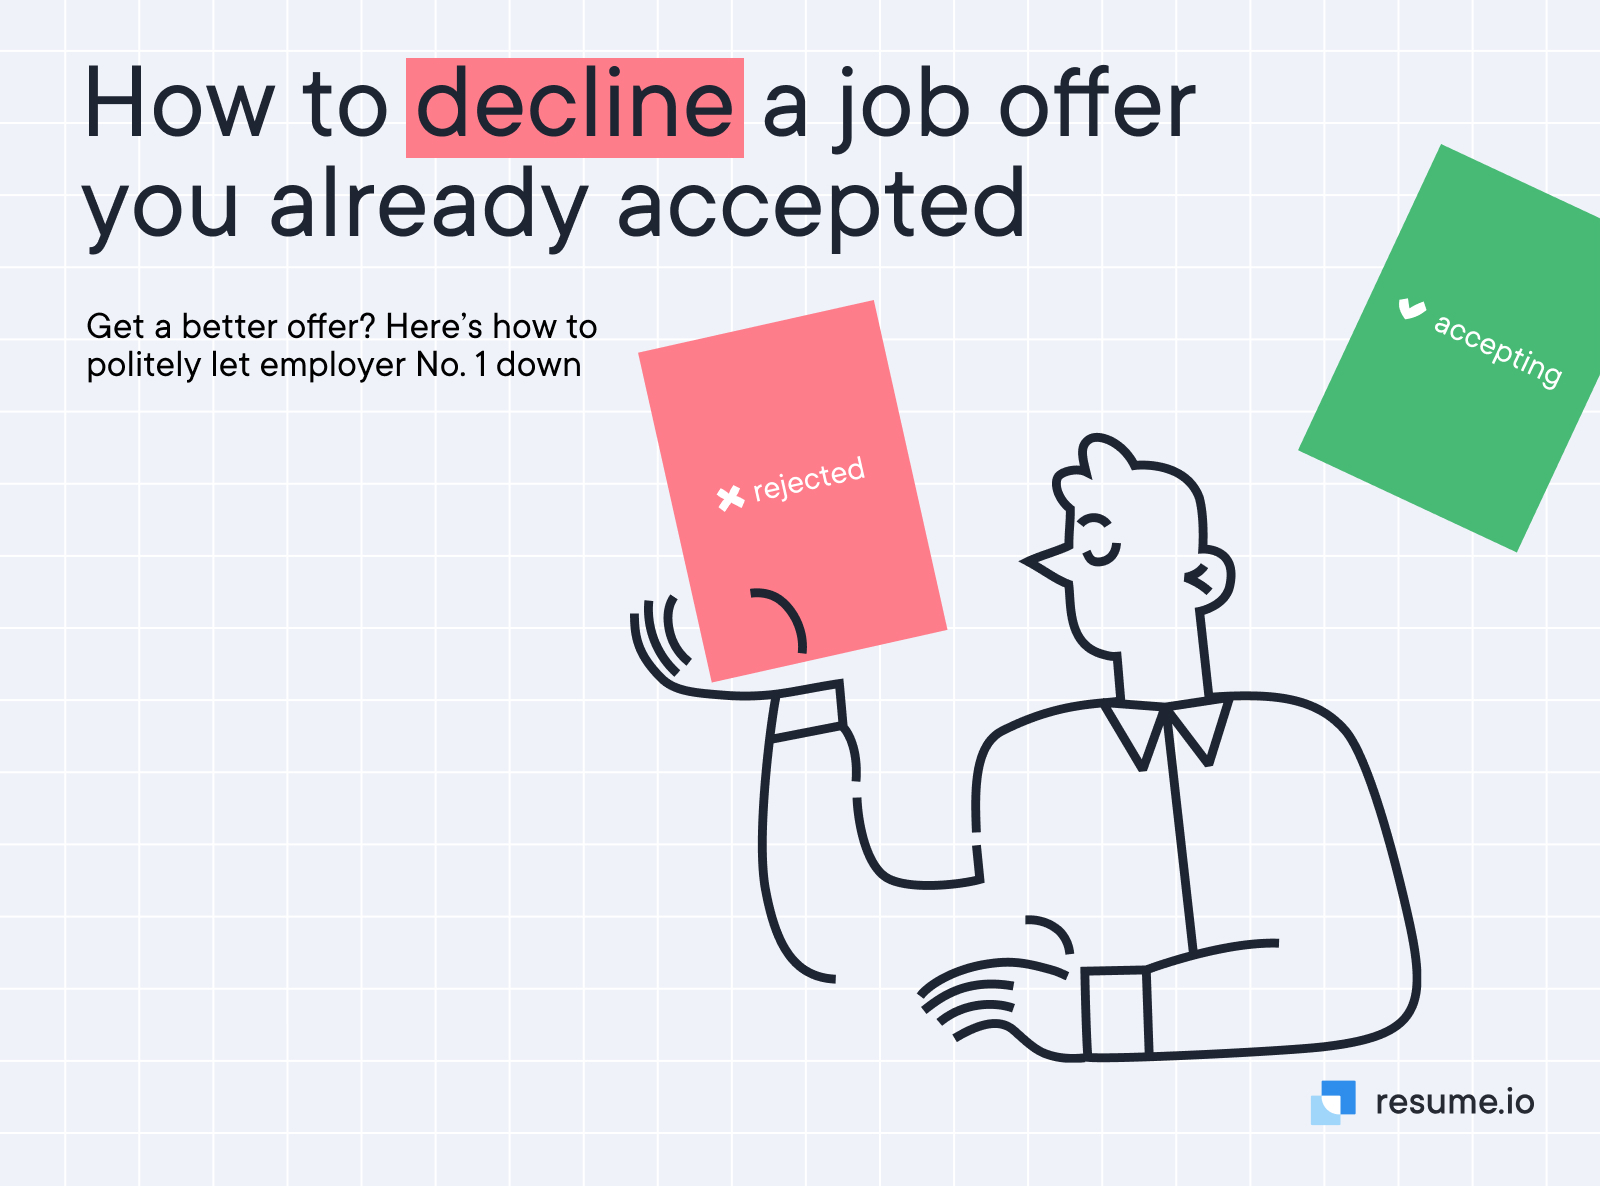 How to decline a job offer you already accepted